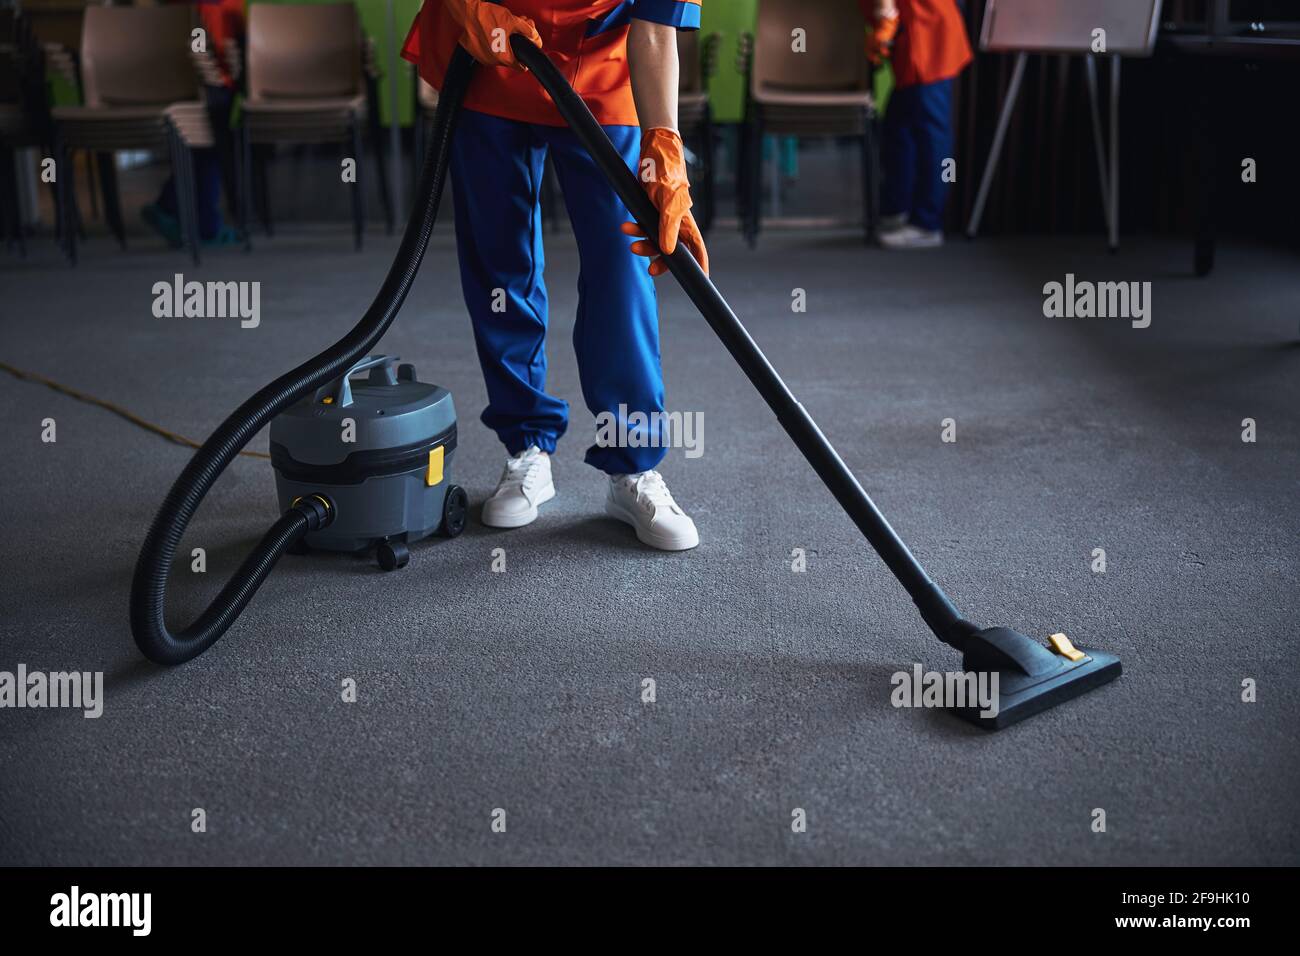 Cleaning lady using a canister vacuum cleaner Stock Photo